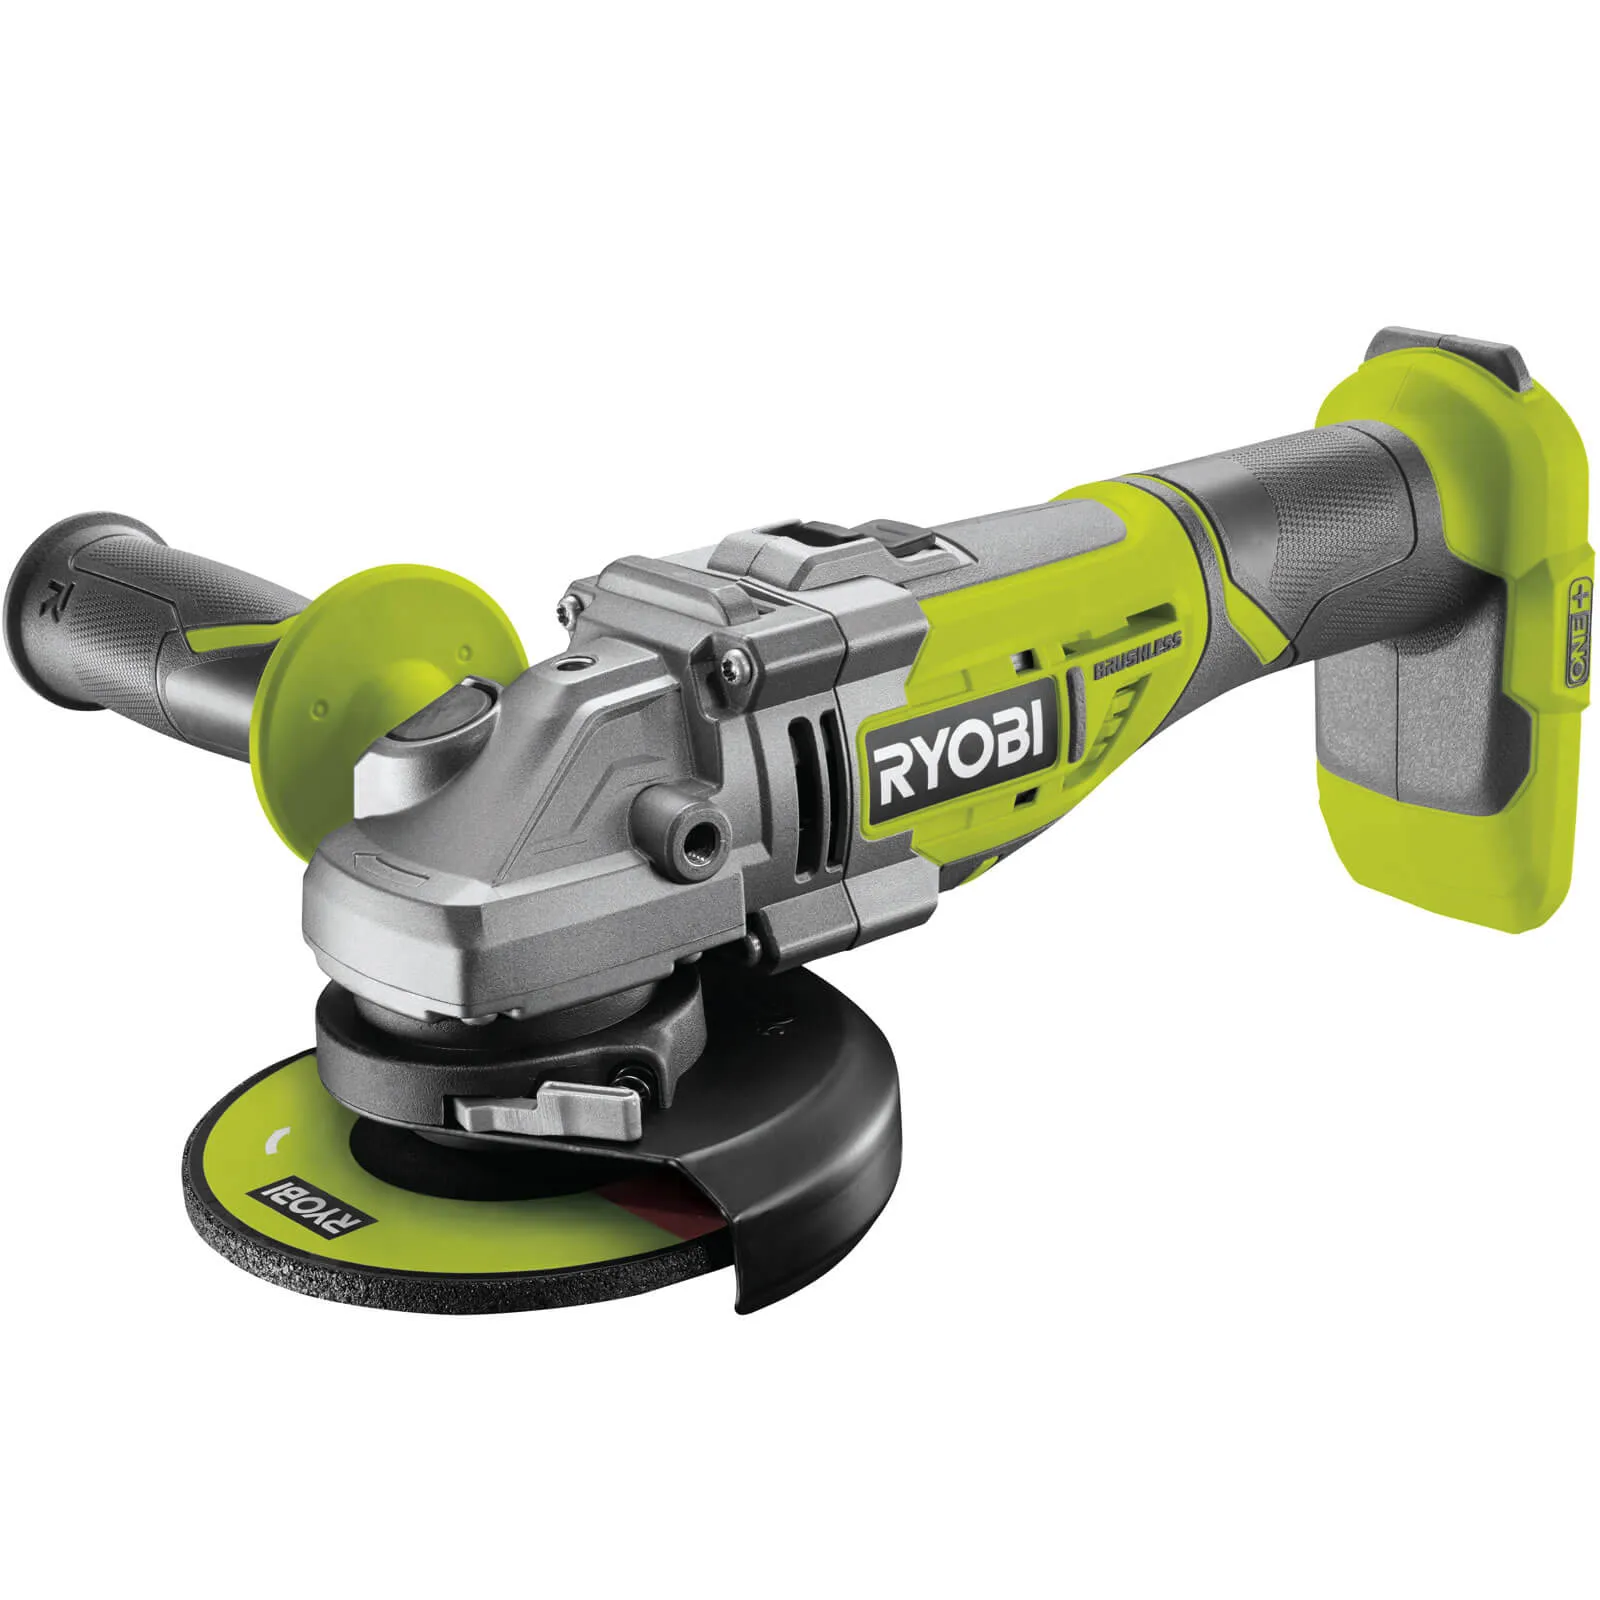 Ryobi R18AG7 ONE+ 18v Cordless Brushless Angle Grinder 125mm - No Batteries, No Charger, No Case